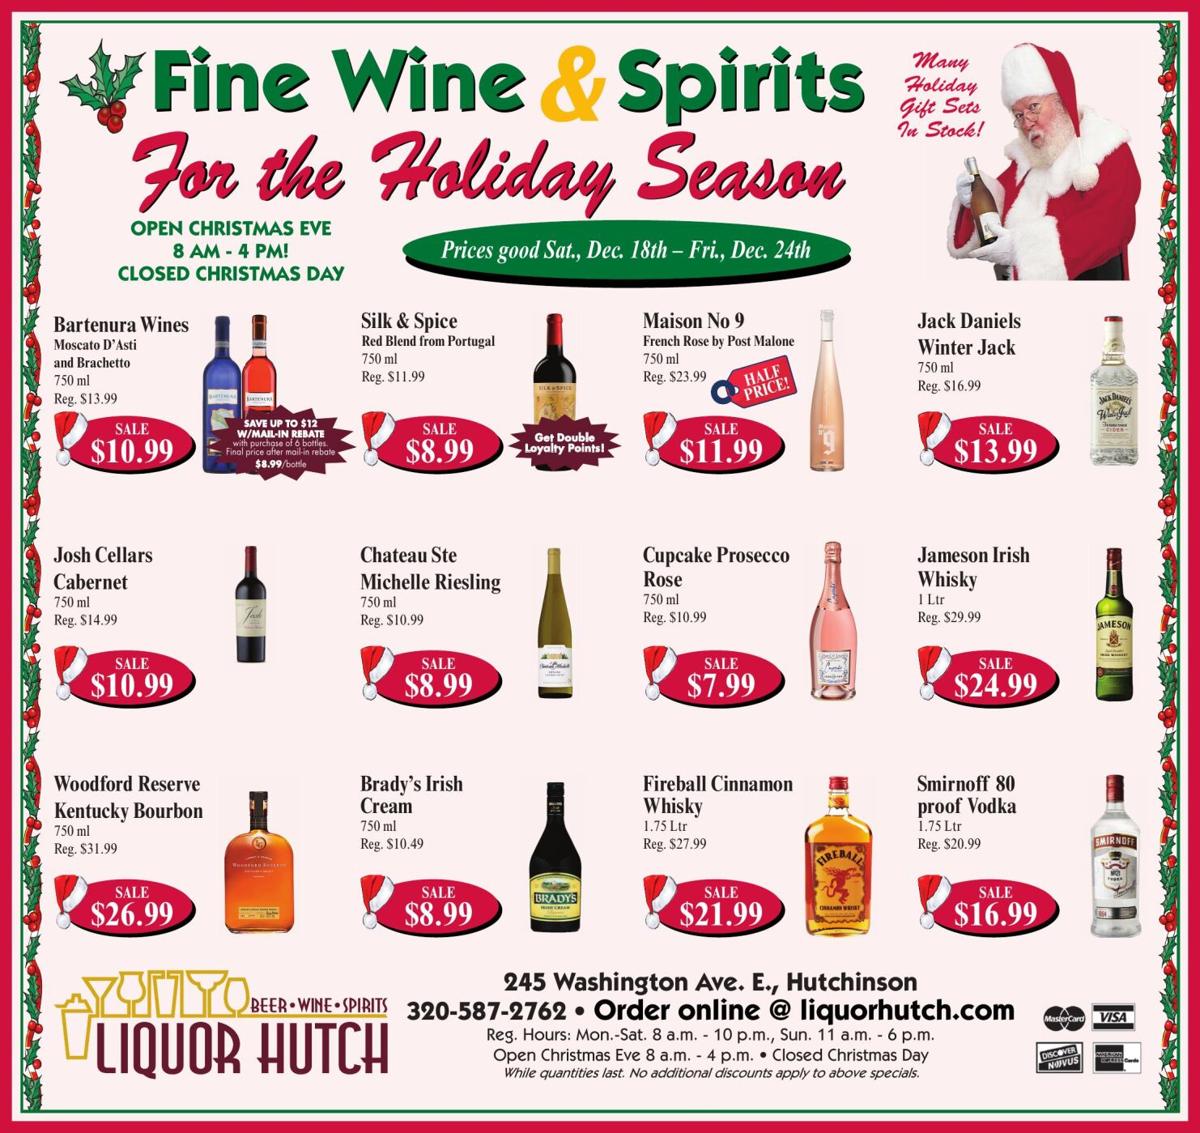 Fine Wine & Spirits For the Holiday